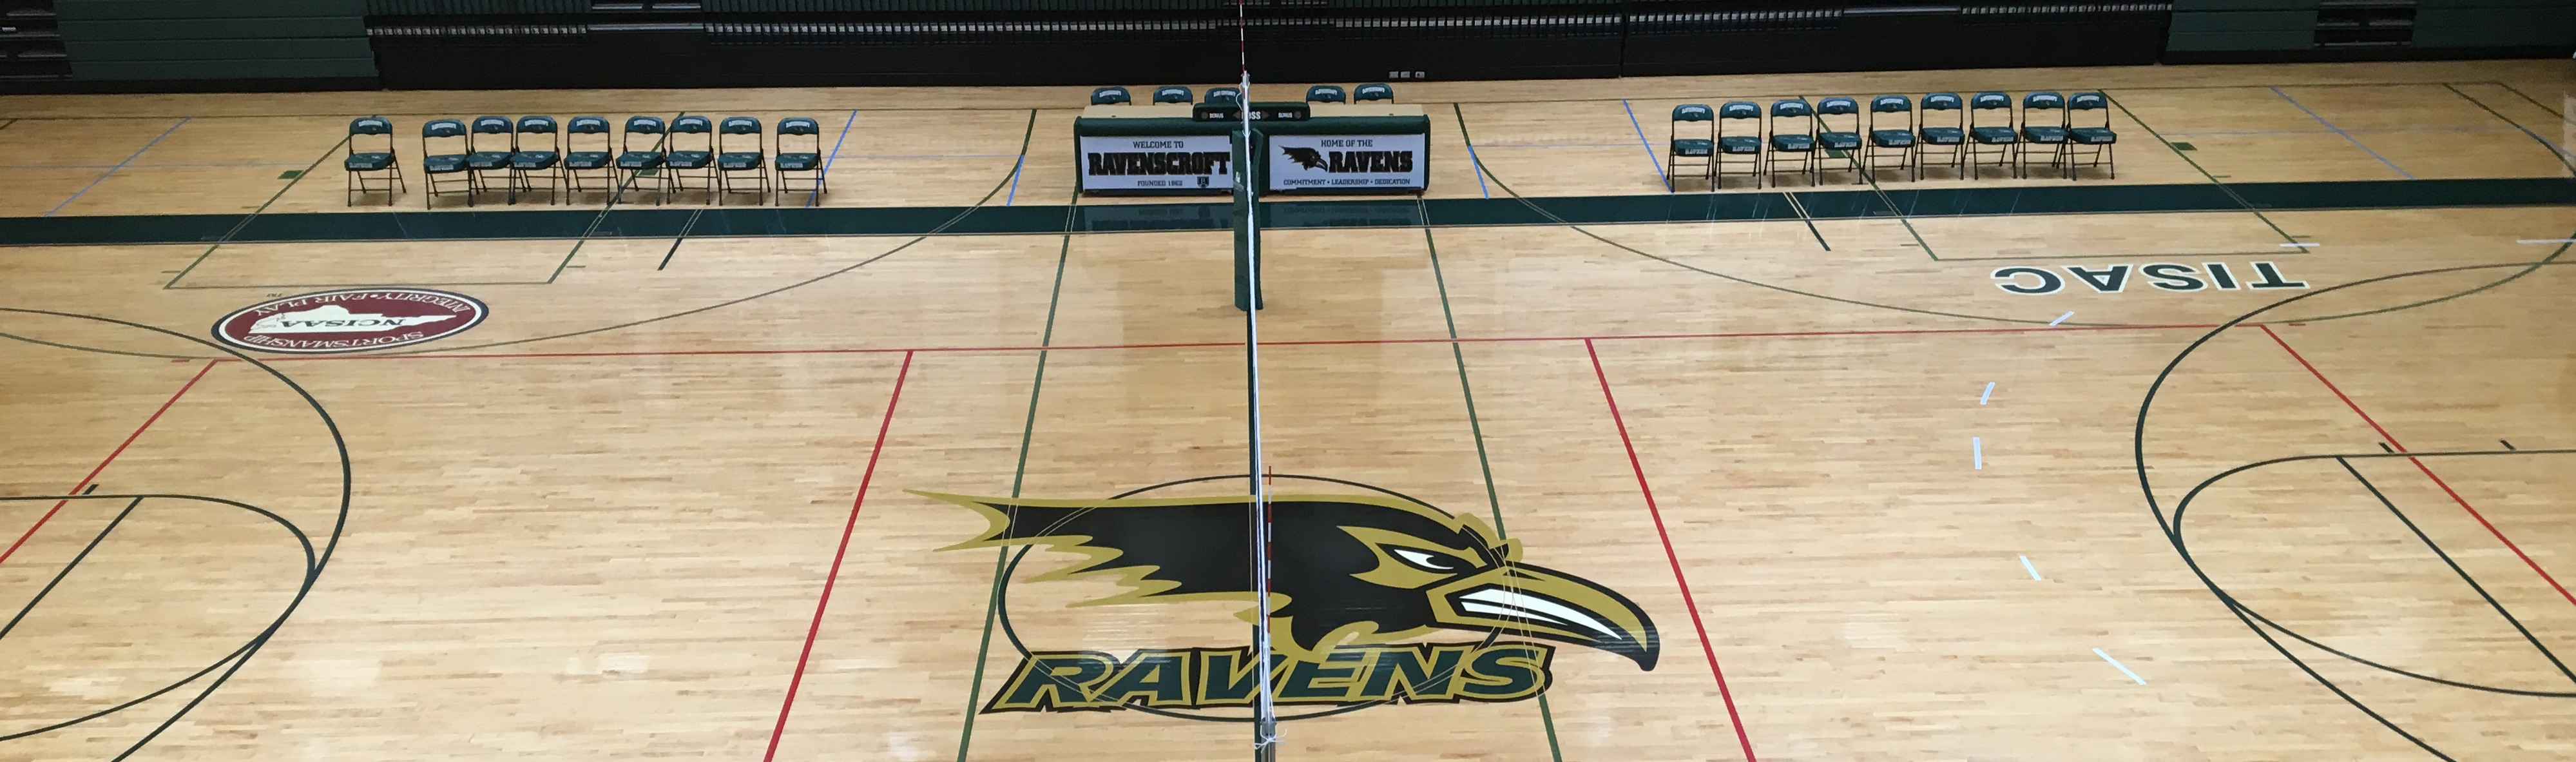 Exclusive videos from Ravenscroft School Basketball